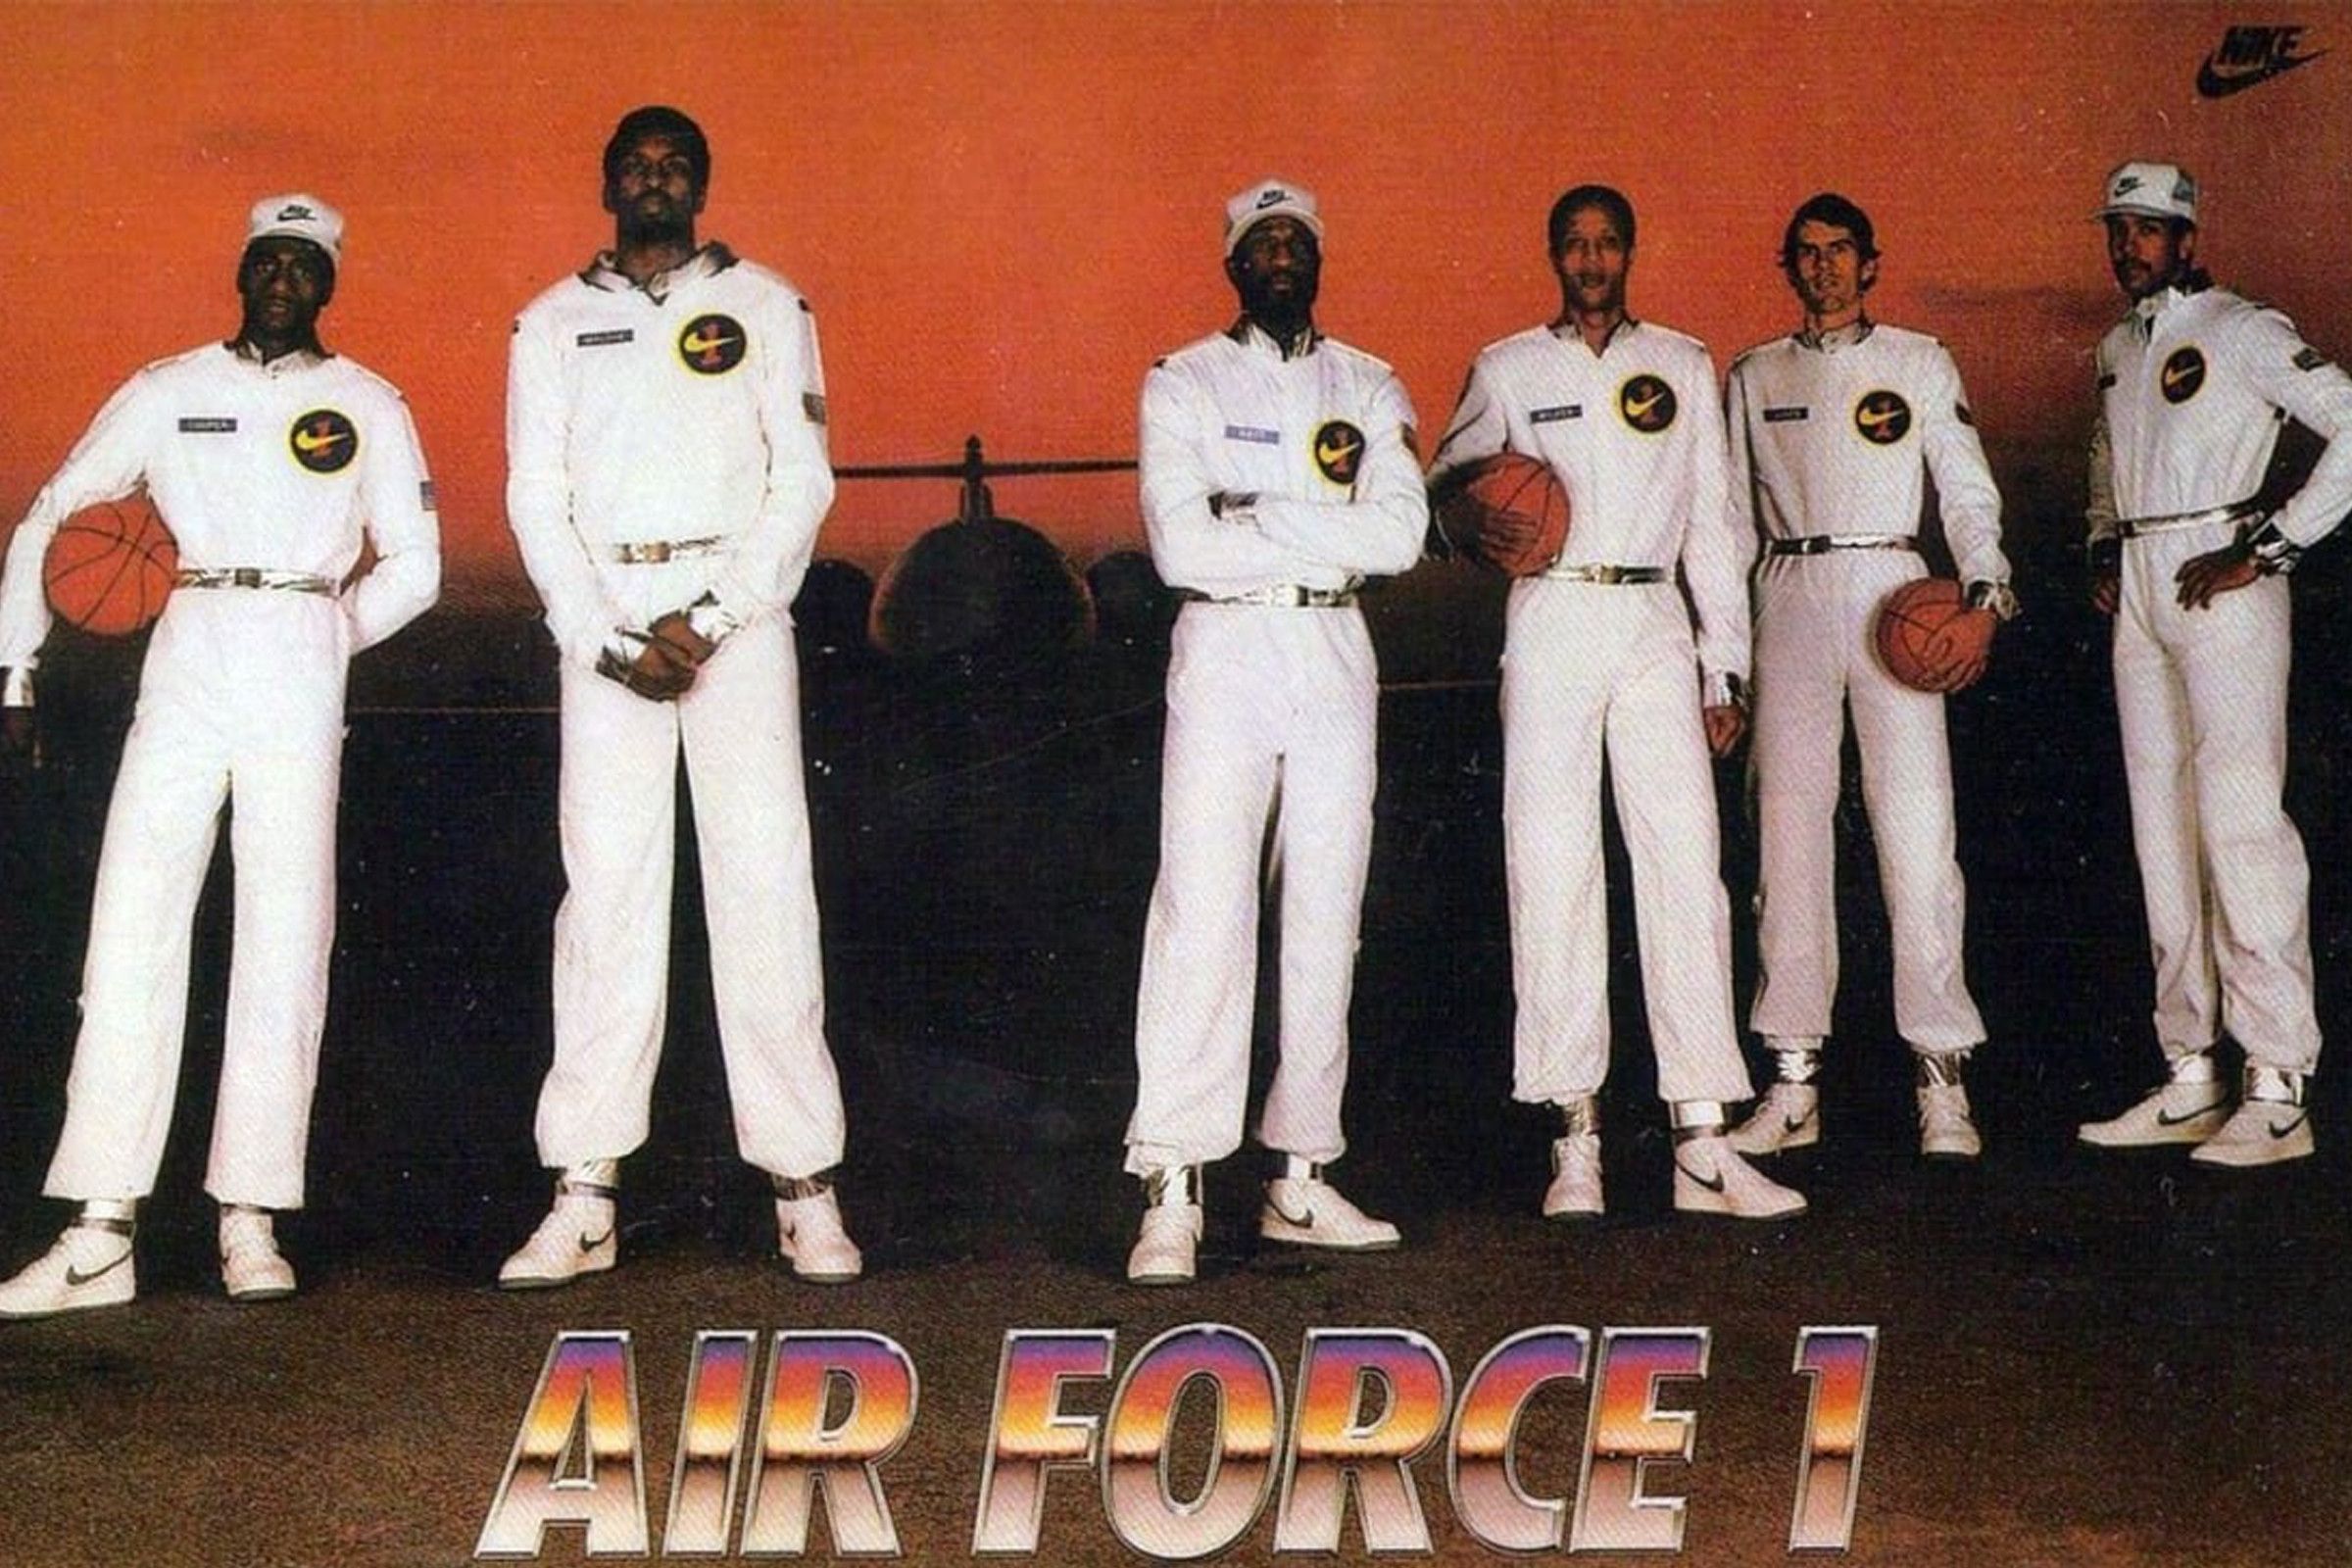 The "Original Six" Air Force 1 campaign featuring: Michael Cooper, Bobby Jones, Moses Malone, Calvin Natt, Mychal Thompson and Jamaal Wilkes